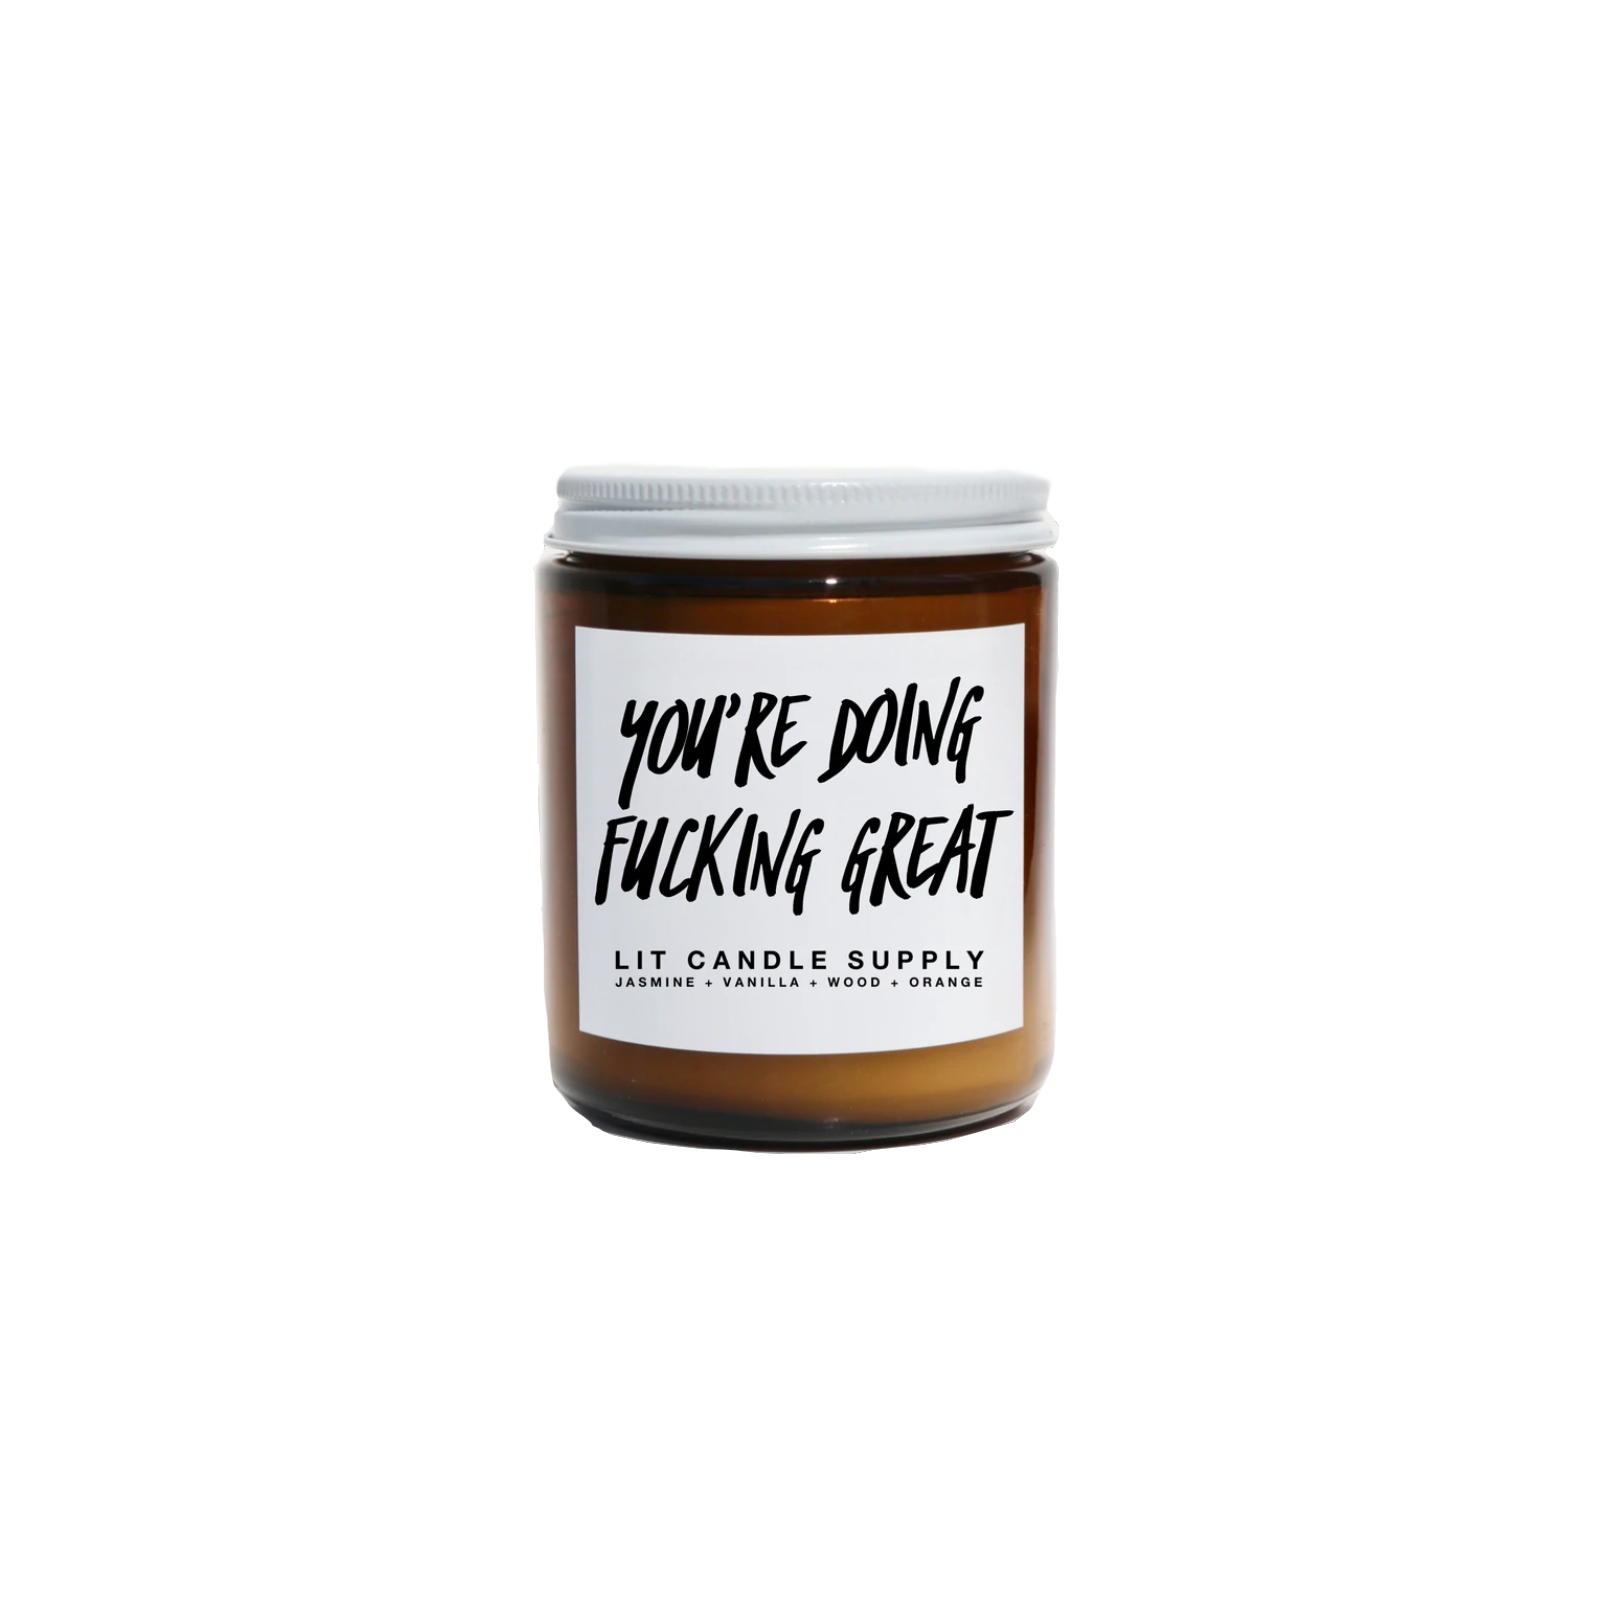 You're Doing F* Great Candle - Amber Glass